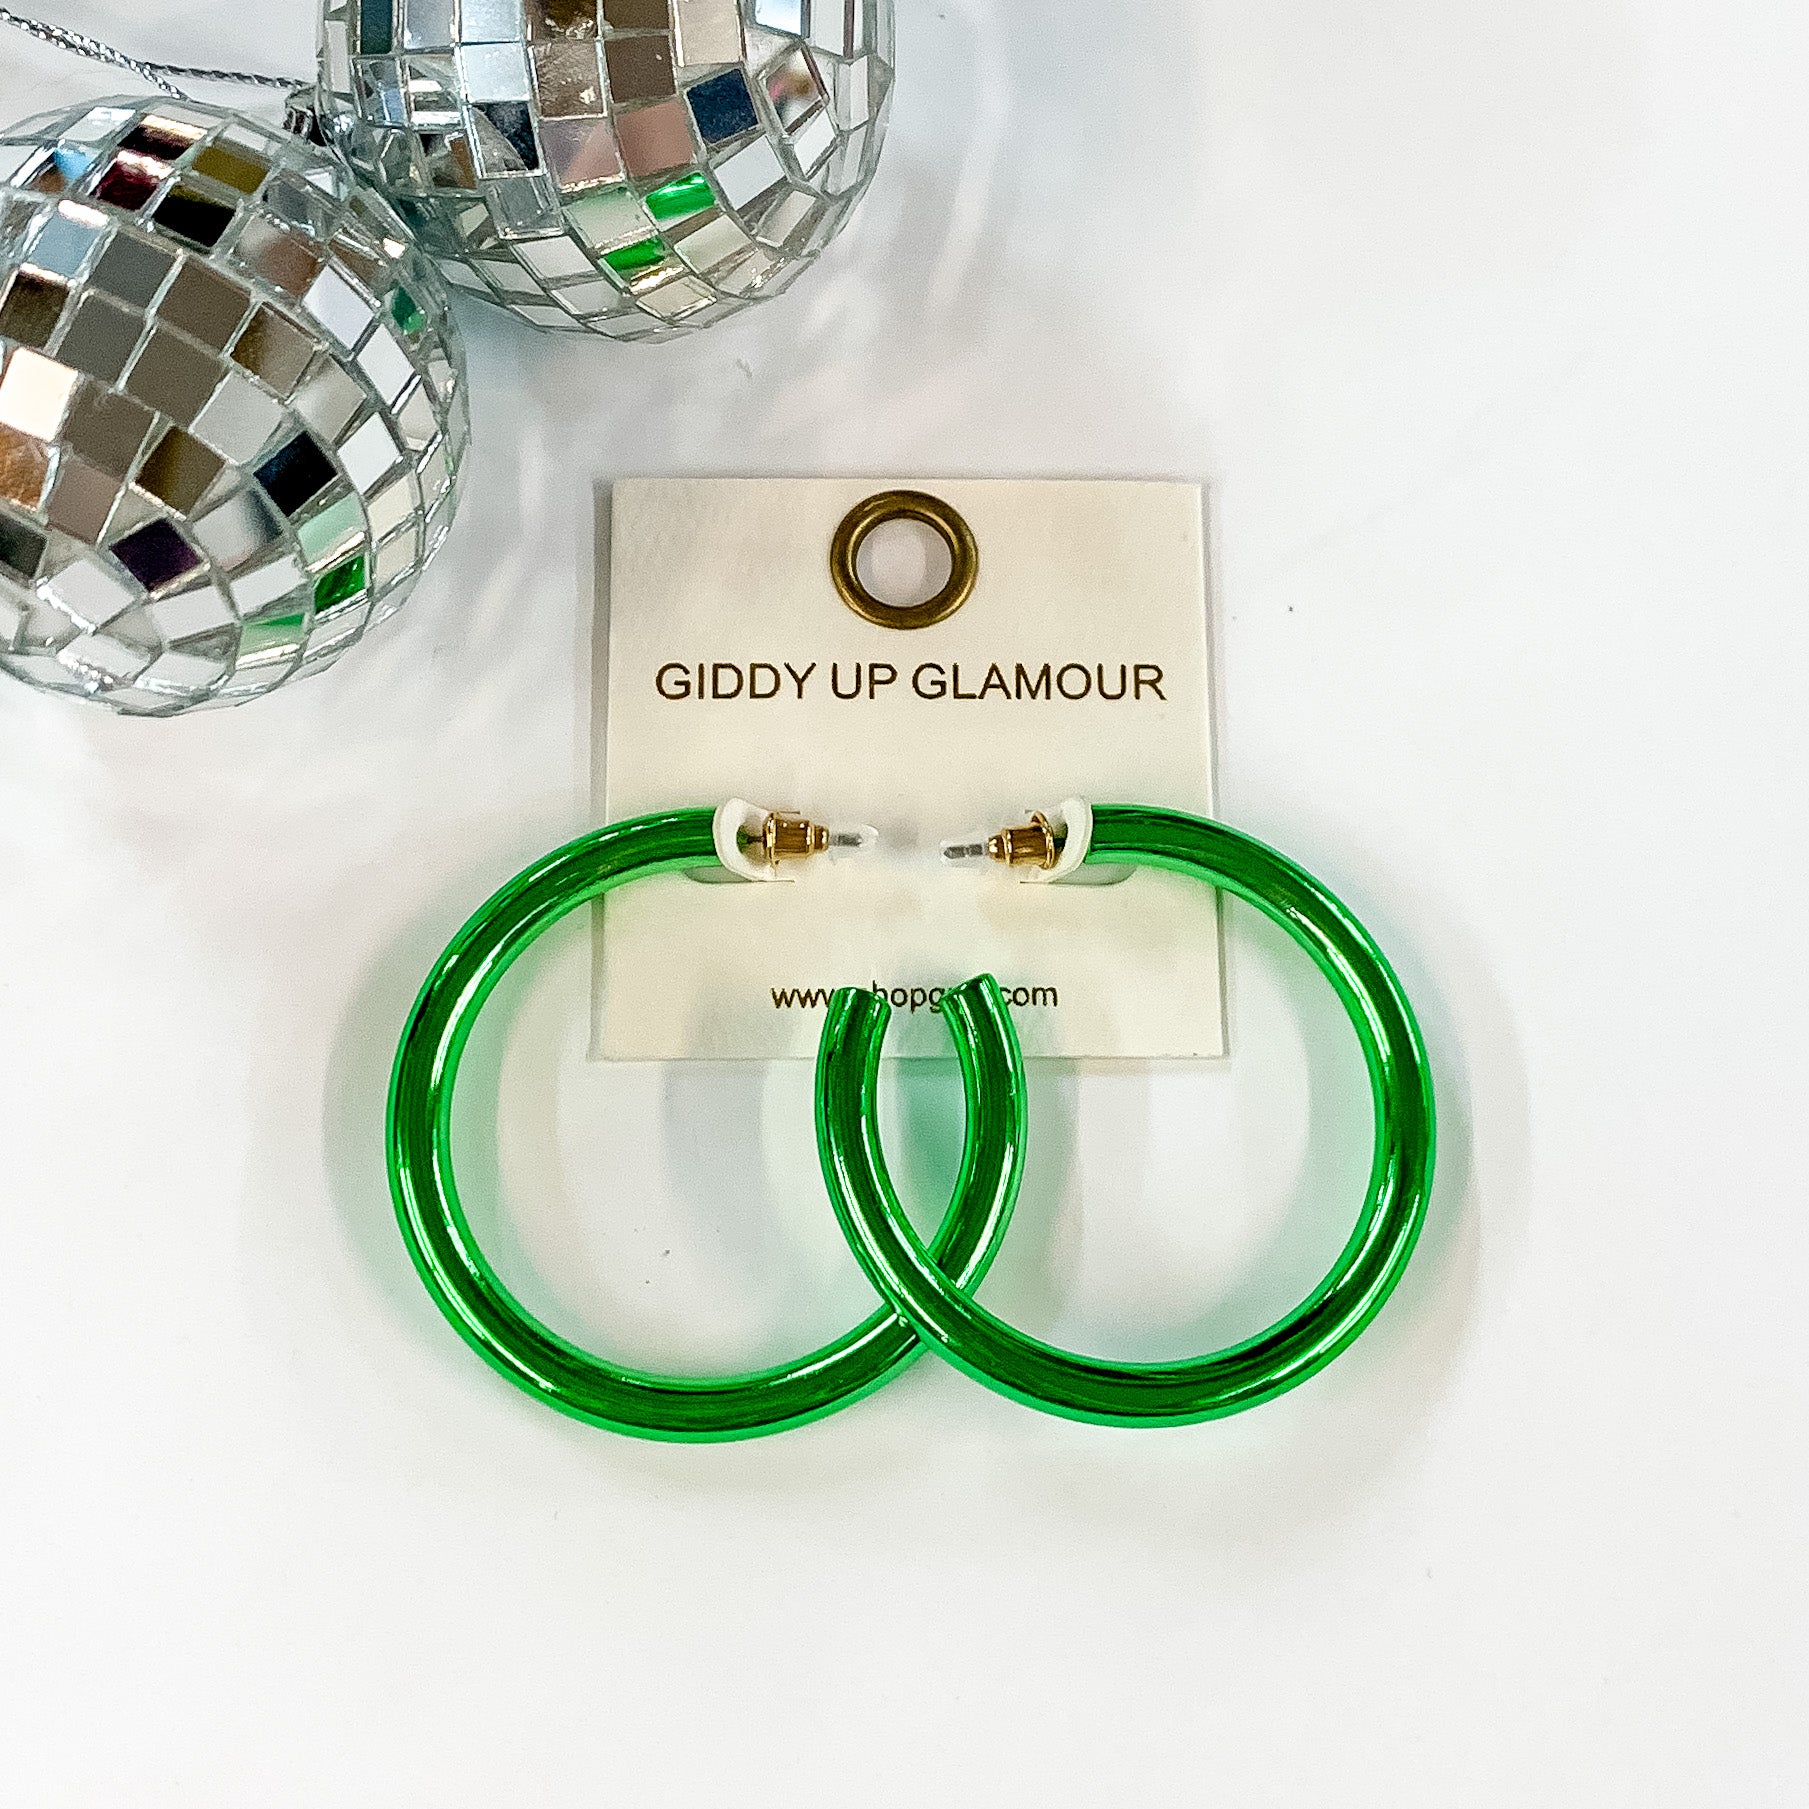 Light Up Large Neon Hoop Earrings In Green. Pictured on a white background with disco balls in the top left corner.